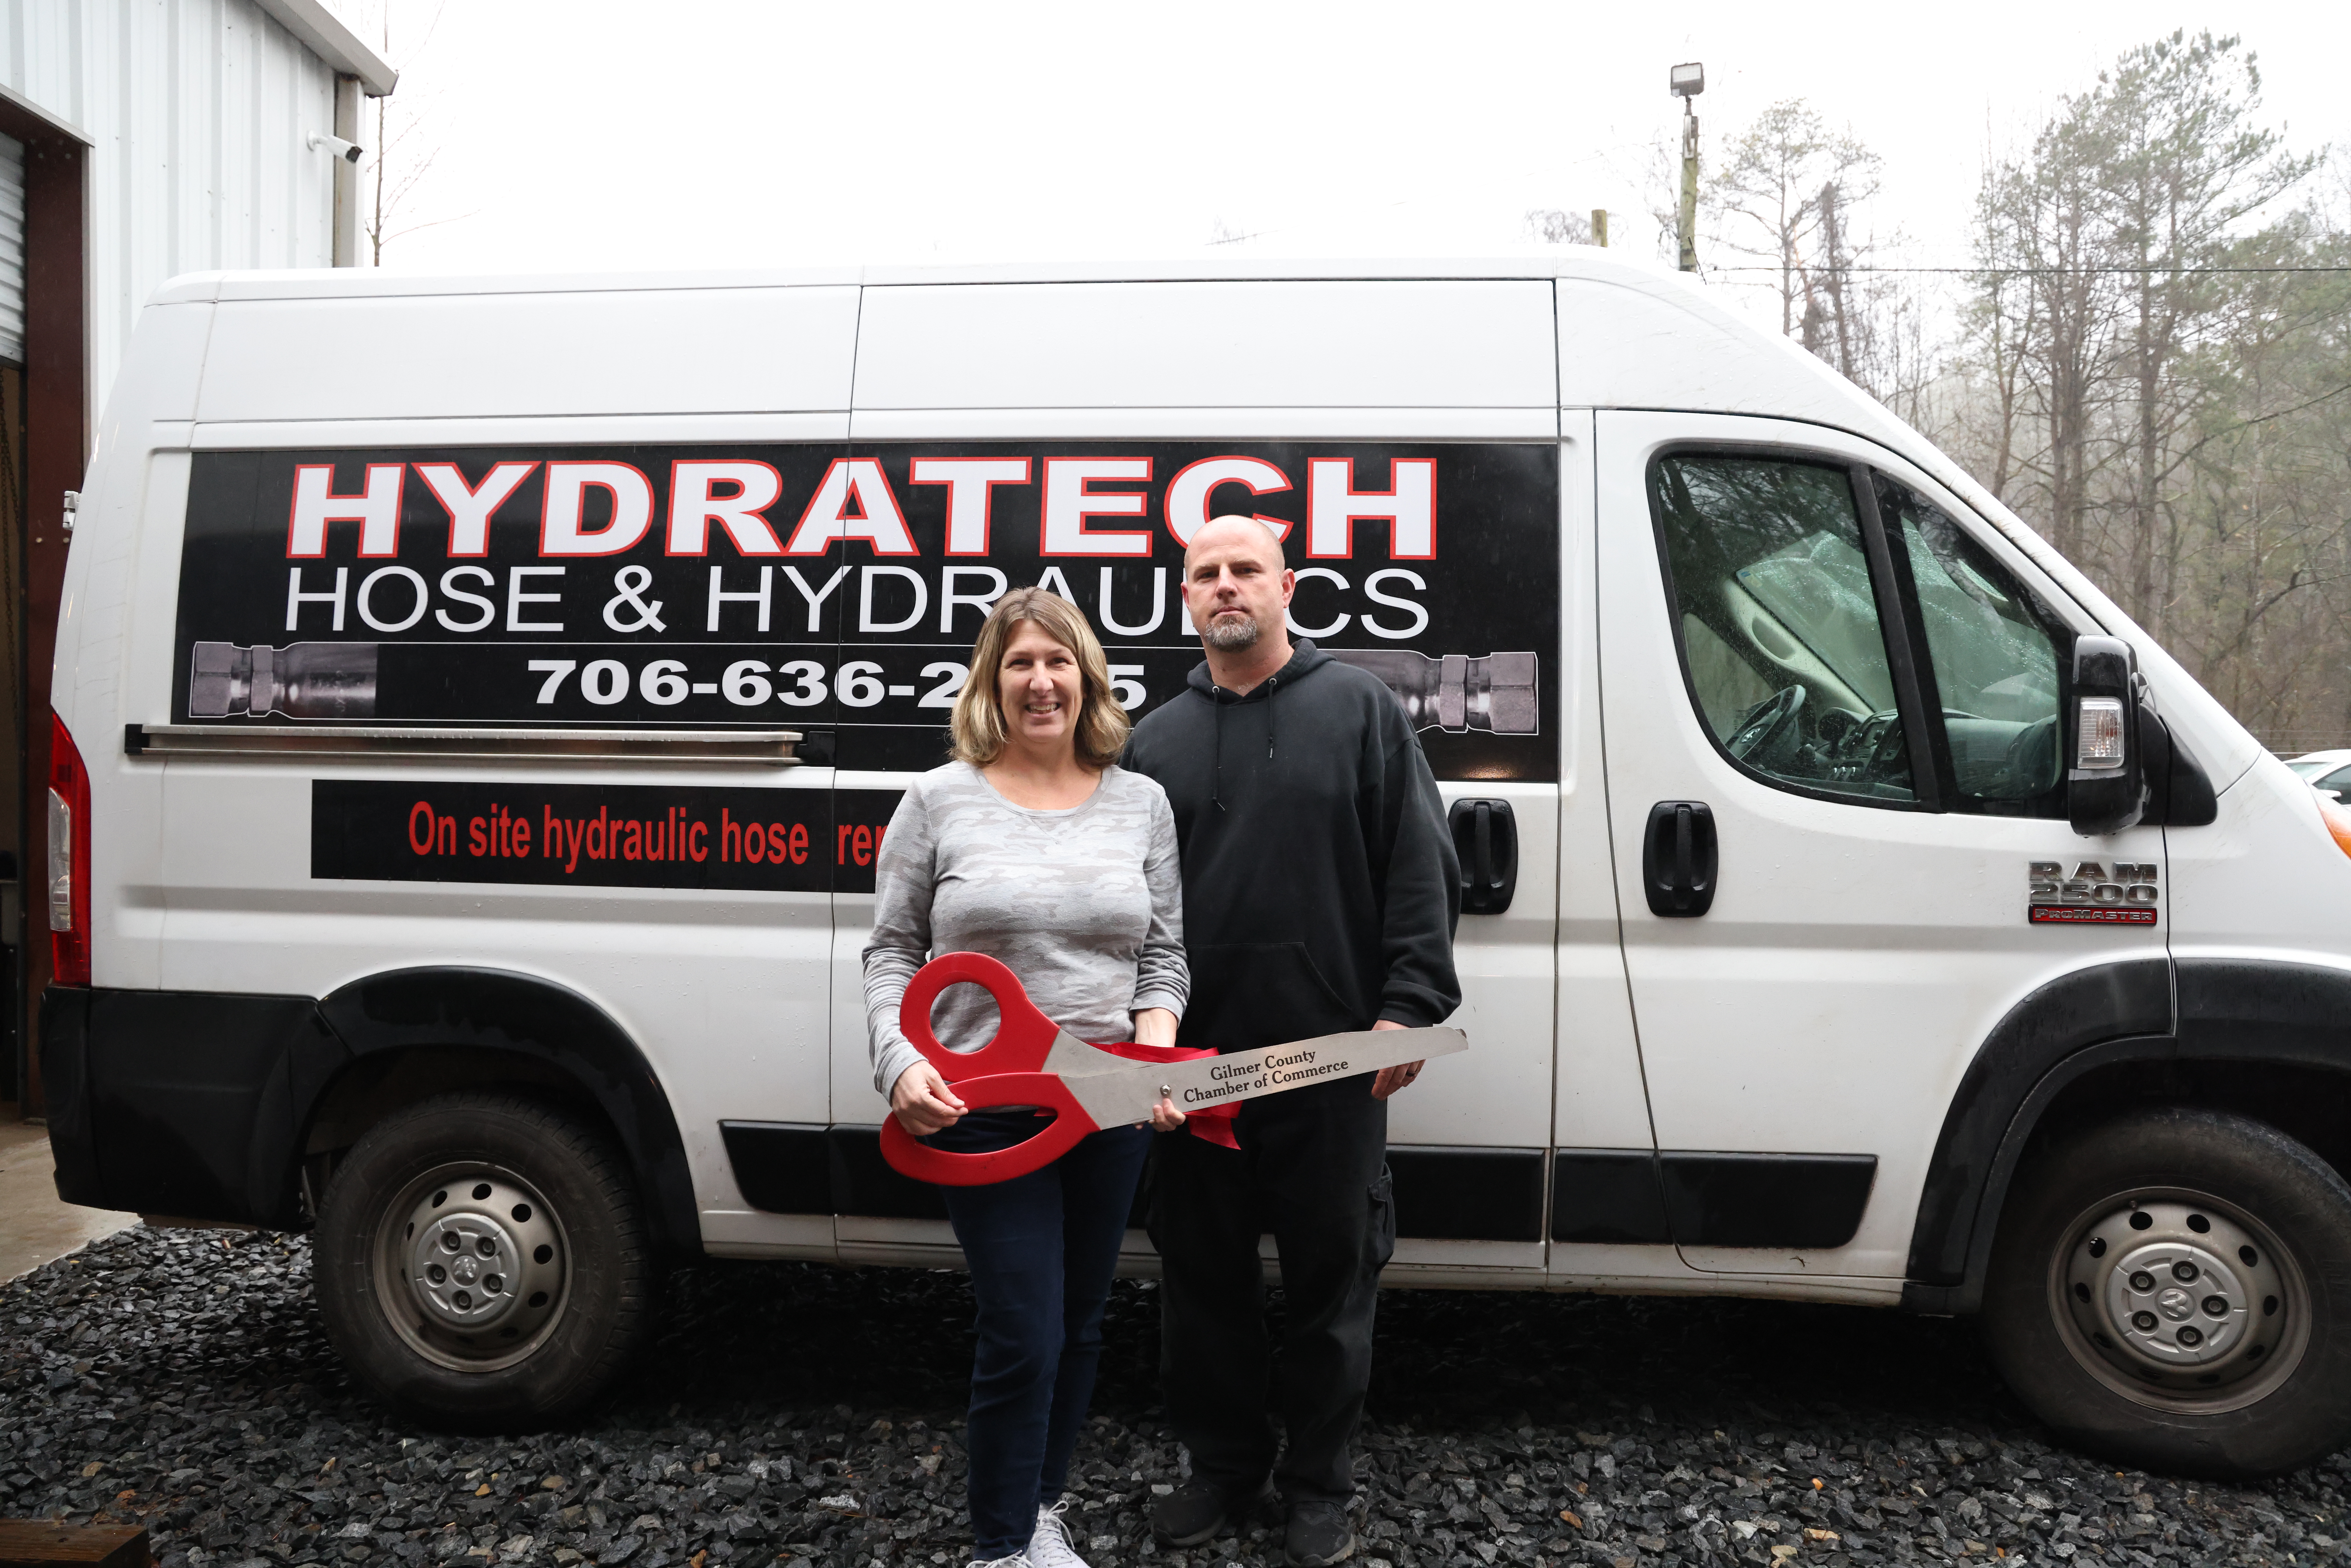 Hydratech owners at ribbon cutting